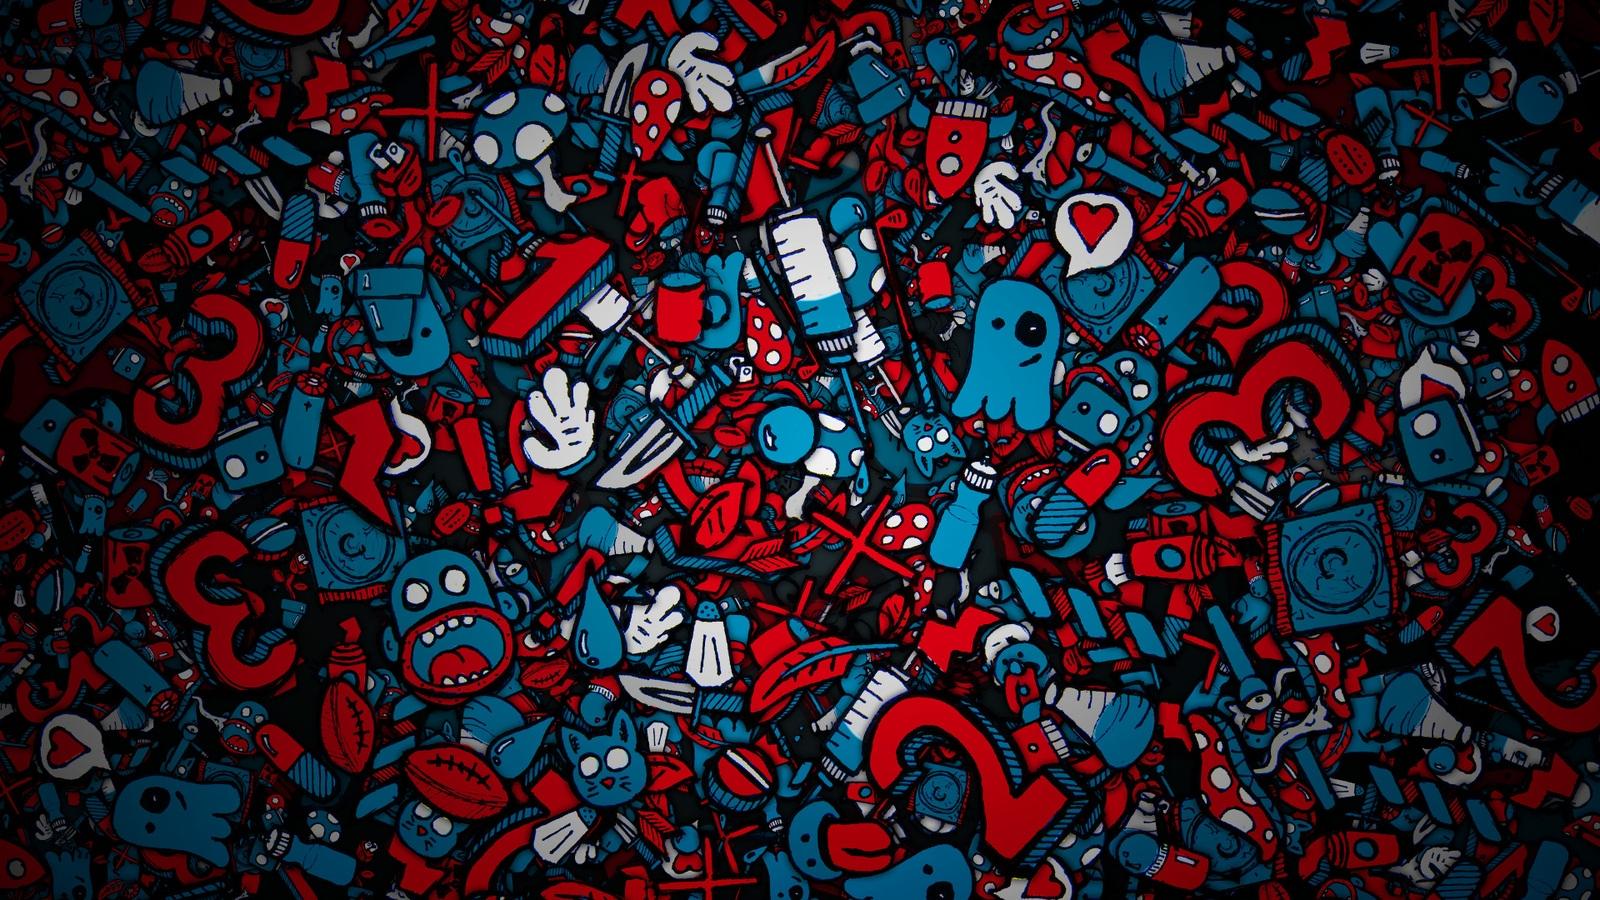 HD wallpaper, Syringe, Blue And Red Monsters Illustration, Piling Up, Faces